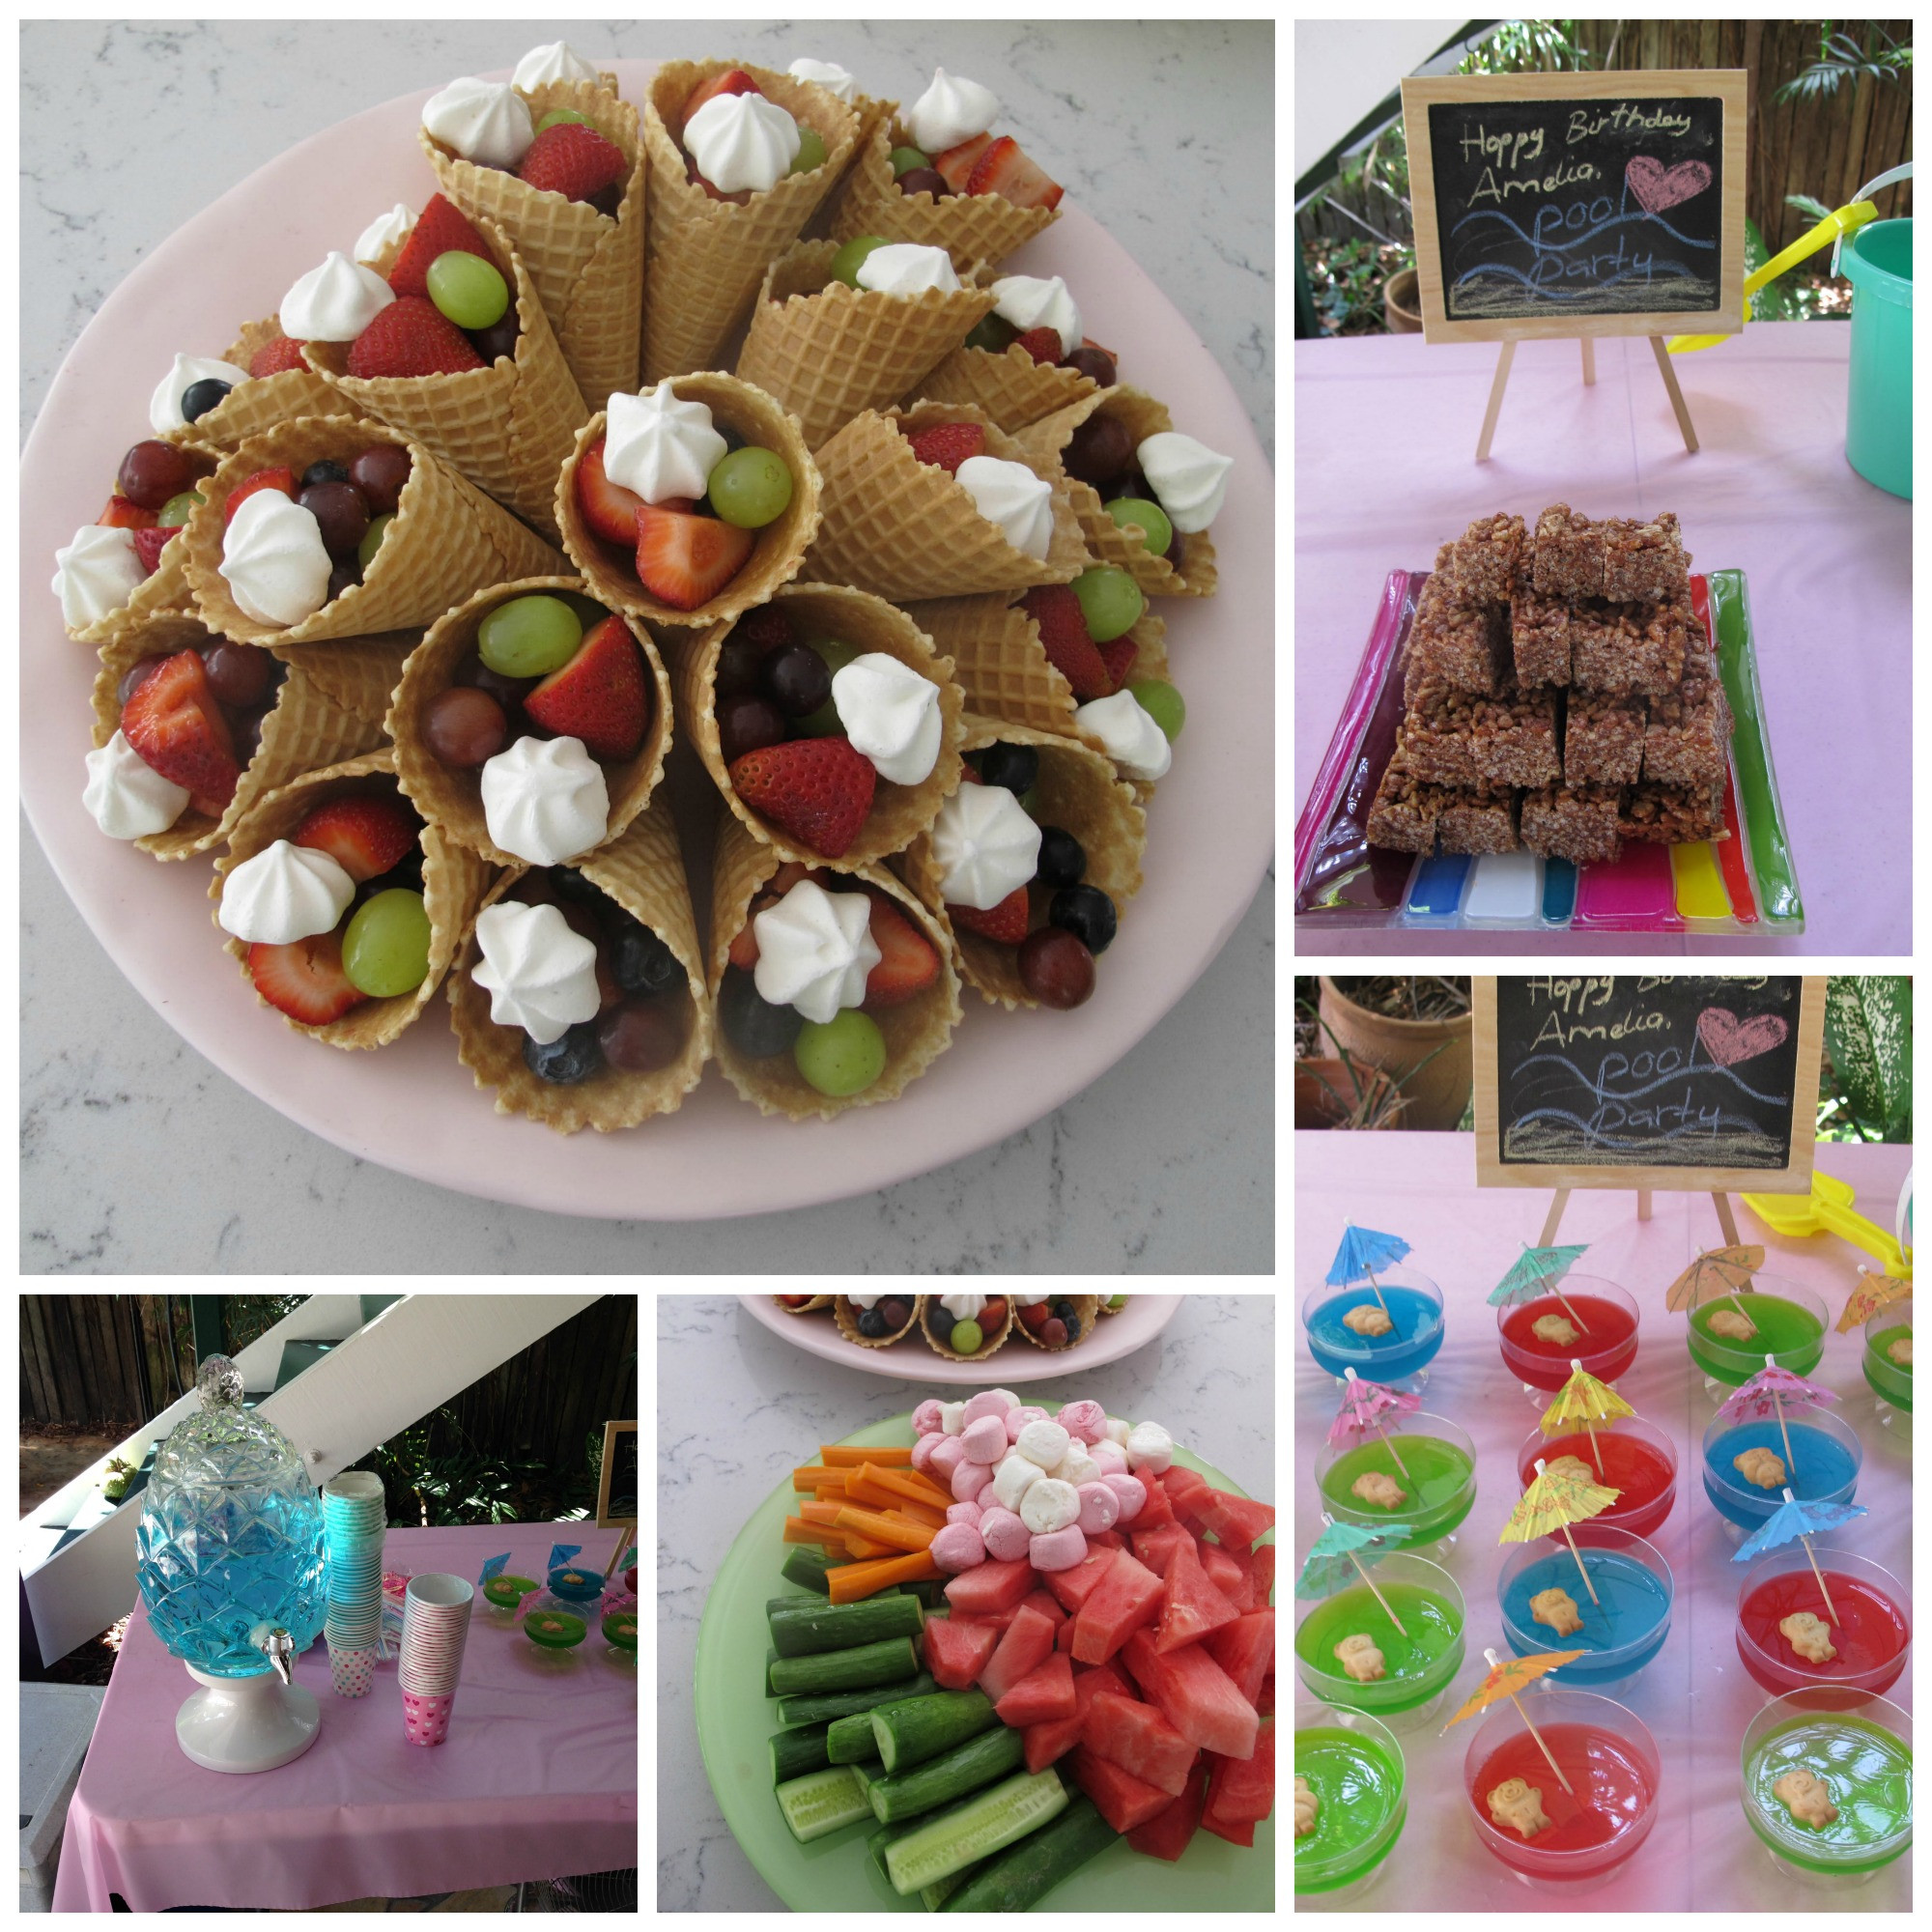 Pool Party Ideas For Food
 Birthday Pool Party Tips Tricks and Cake hint have